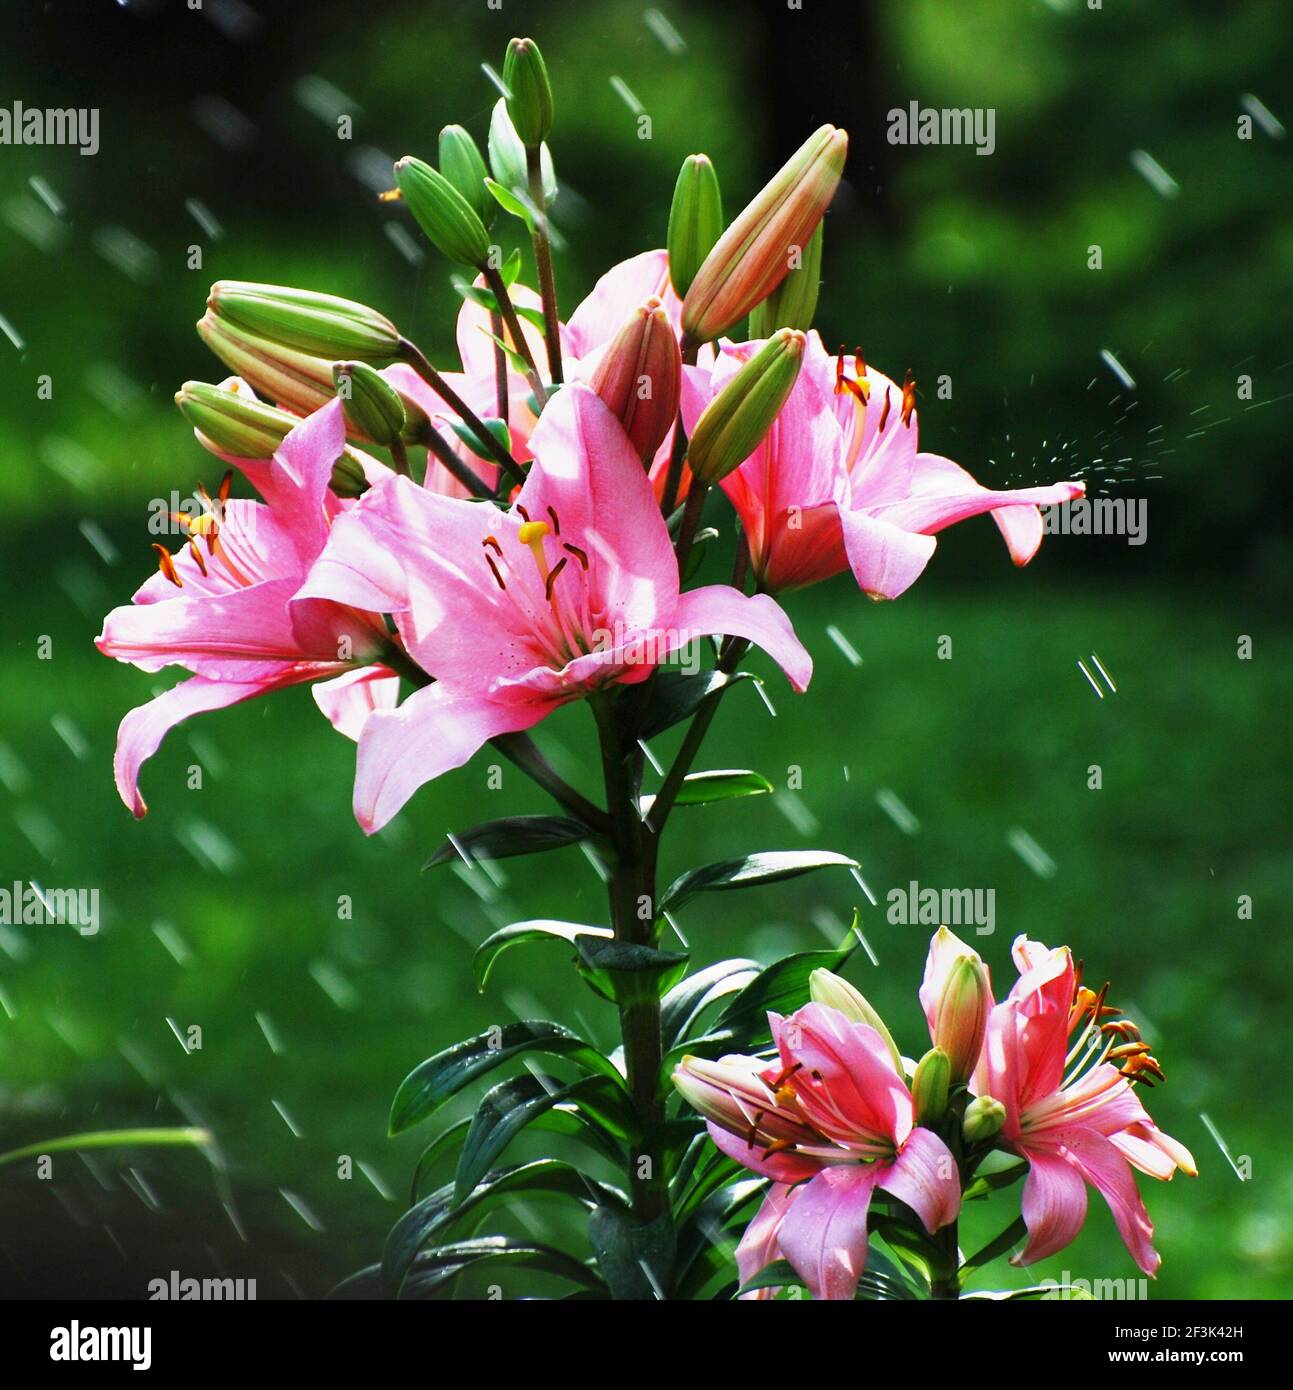 Water sprayed on nice blooming pink lily flower in garden. Stock Photo